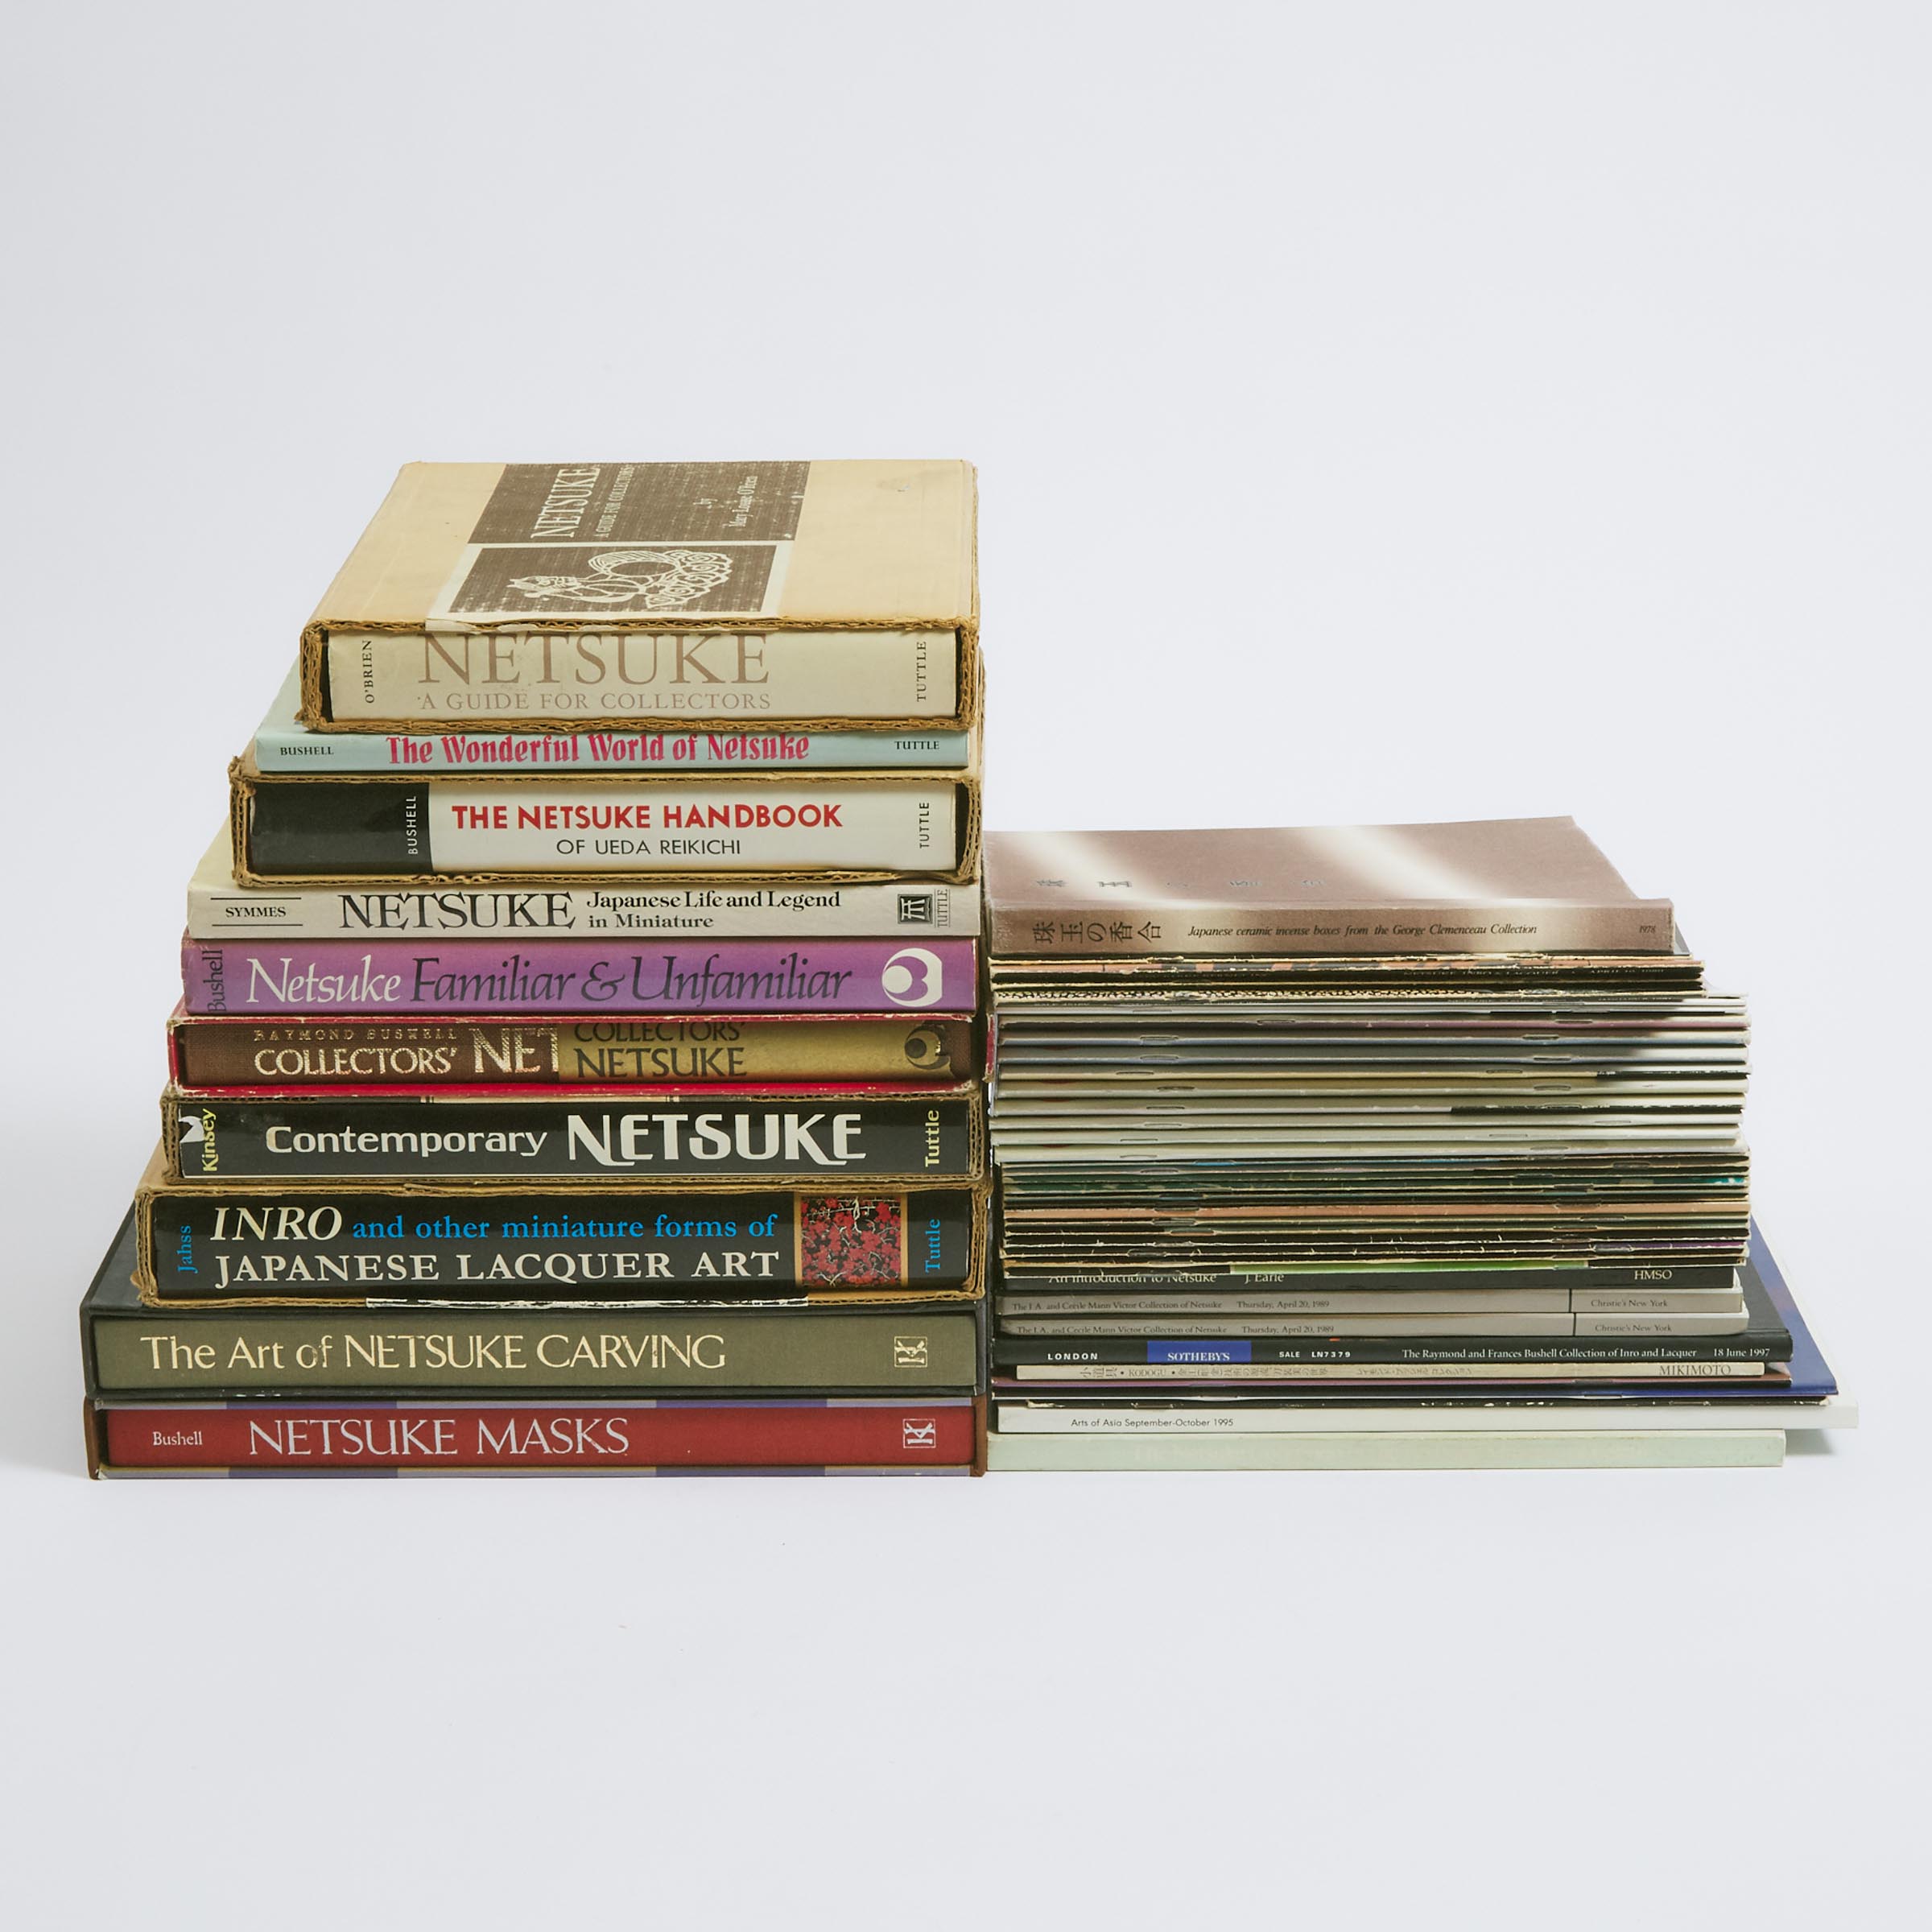 A Group of Thirteen Netsuke Reference Books, Together With Approximately Thirty-Eight Catalogues on Netsuke and Japanese Art